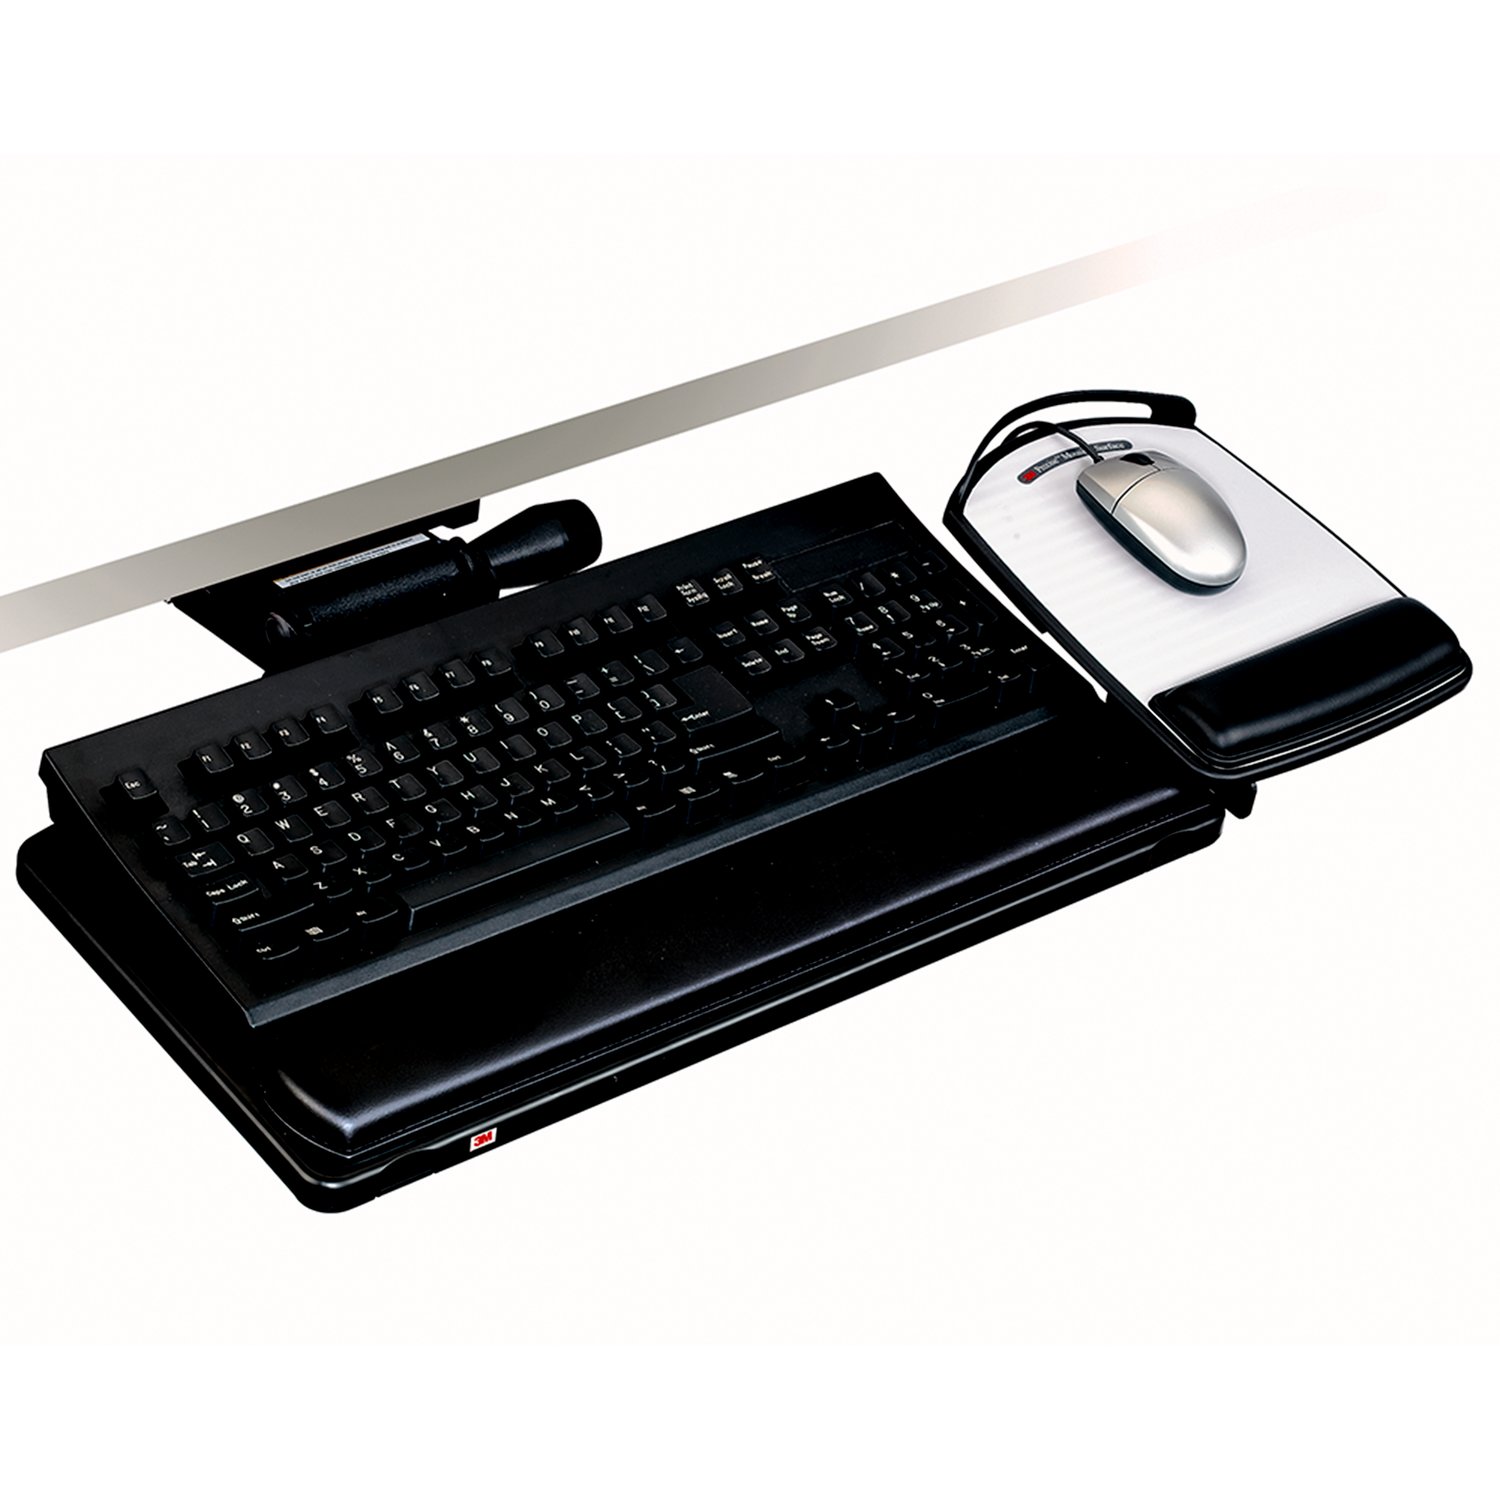 7100151295 - 3M Easy Adjust Keyboard Tray with Adjustable Keyboard and Mouse
Platform, 23 in Track, AKT150LE